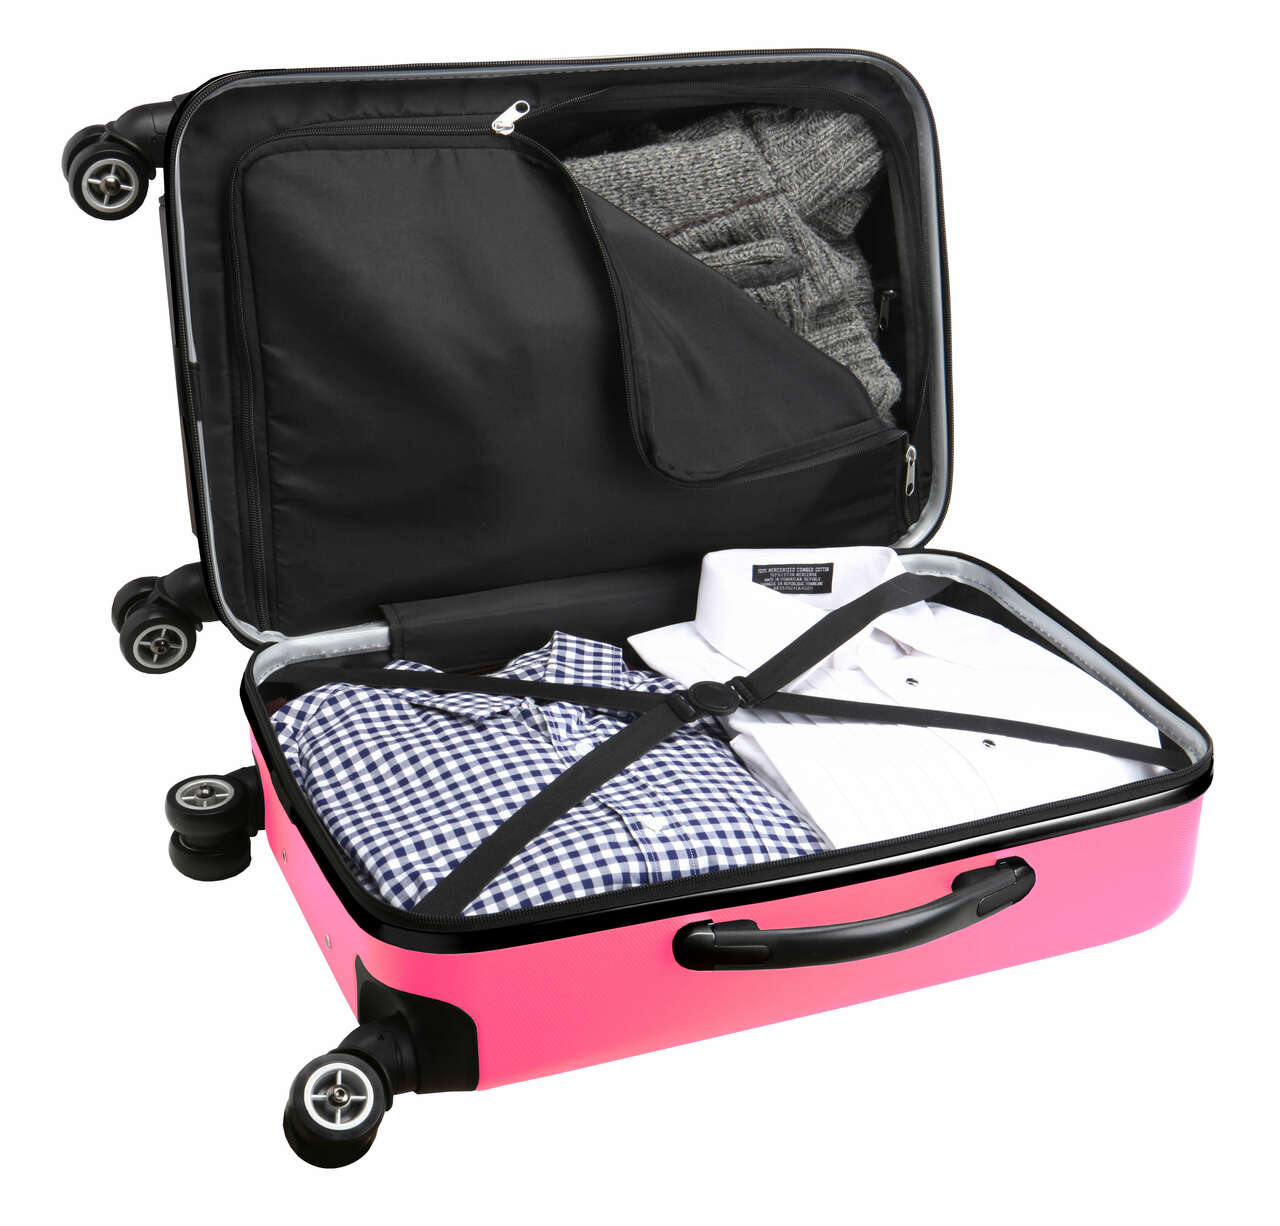 TCU Horned Frogs 20" Pink Domestic Carry-on Spinner